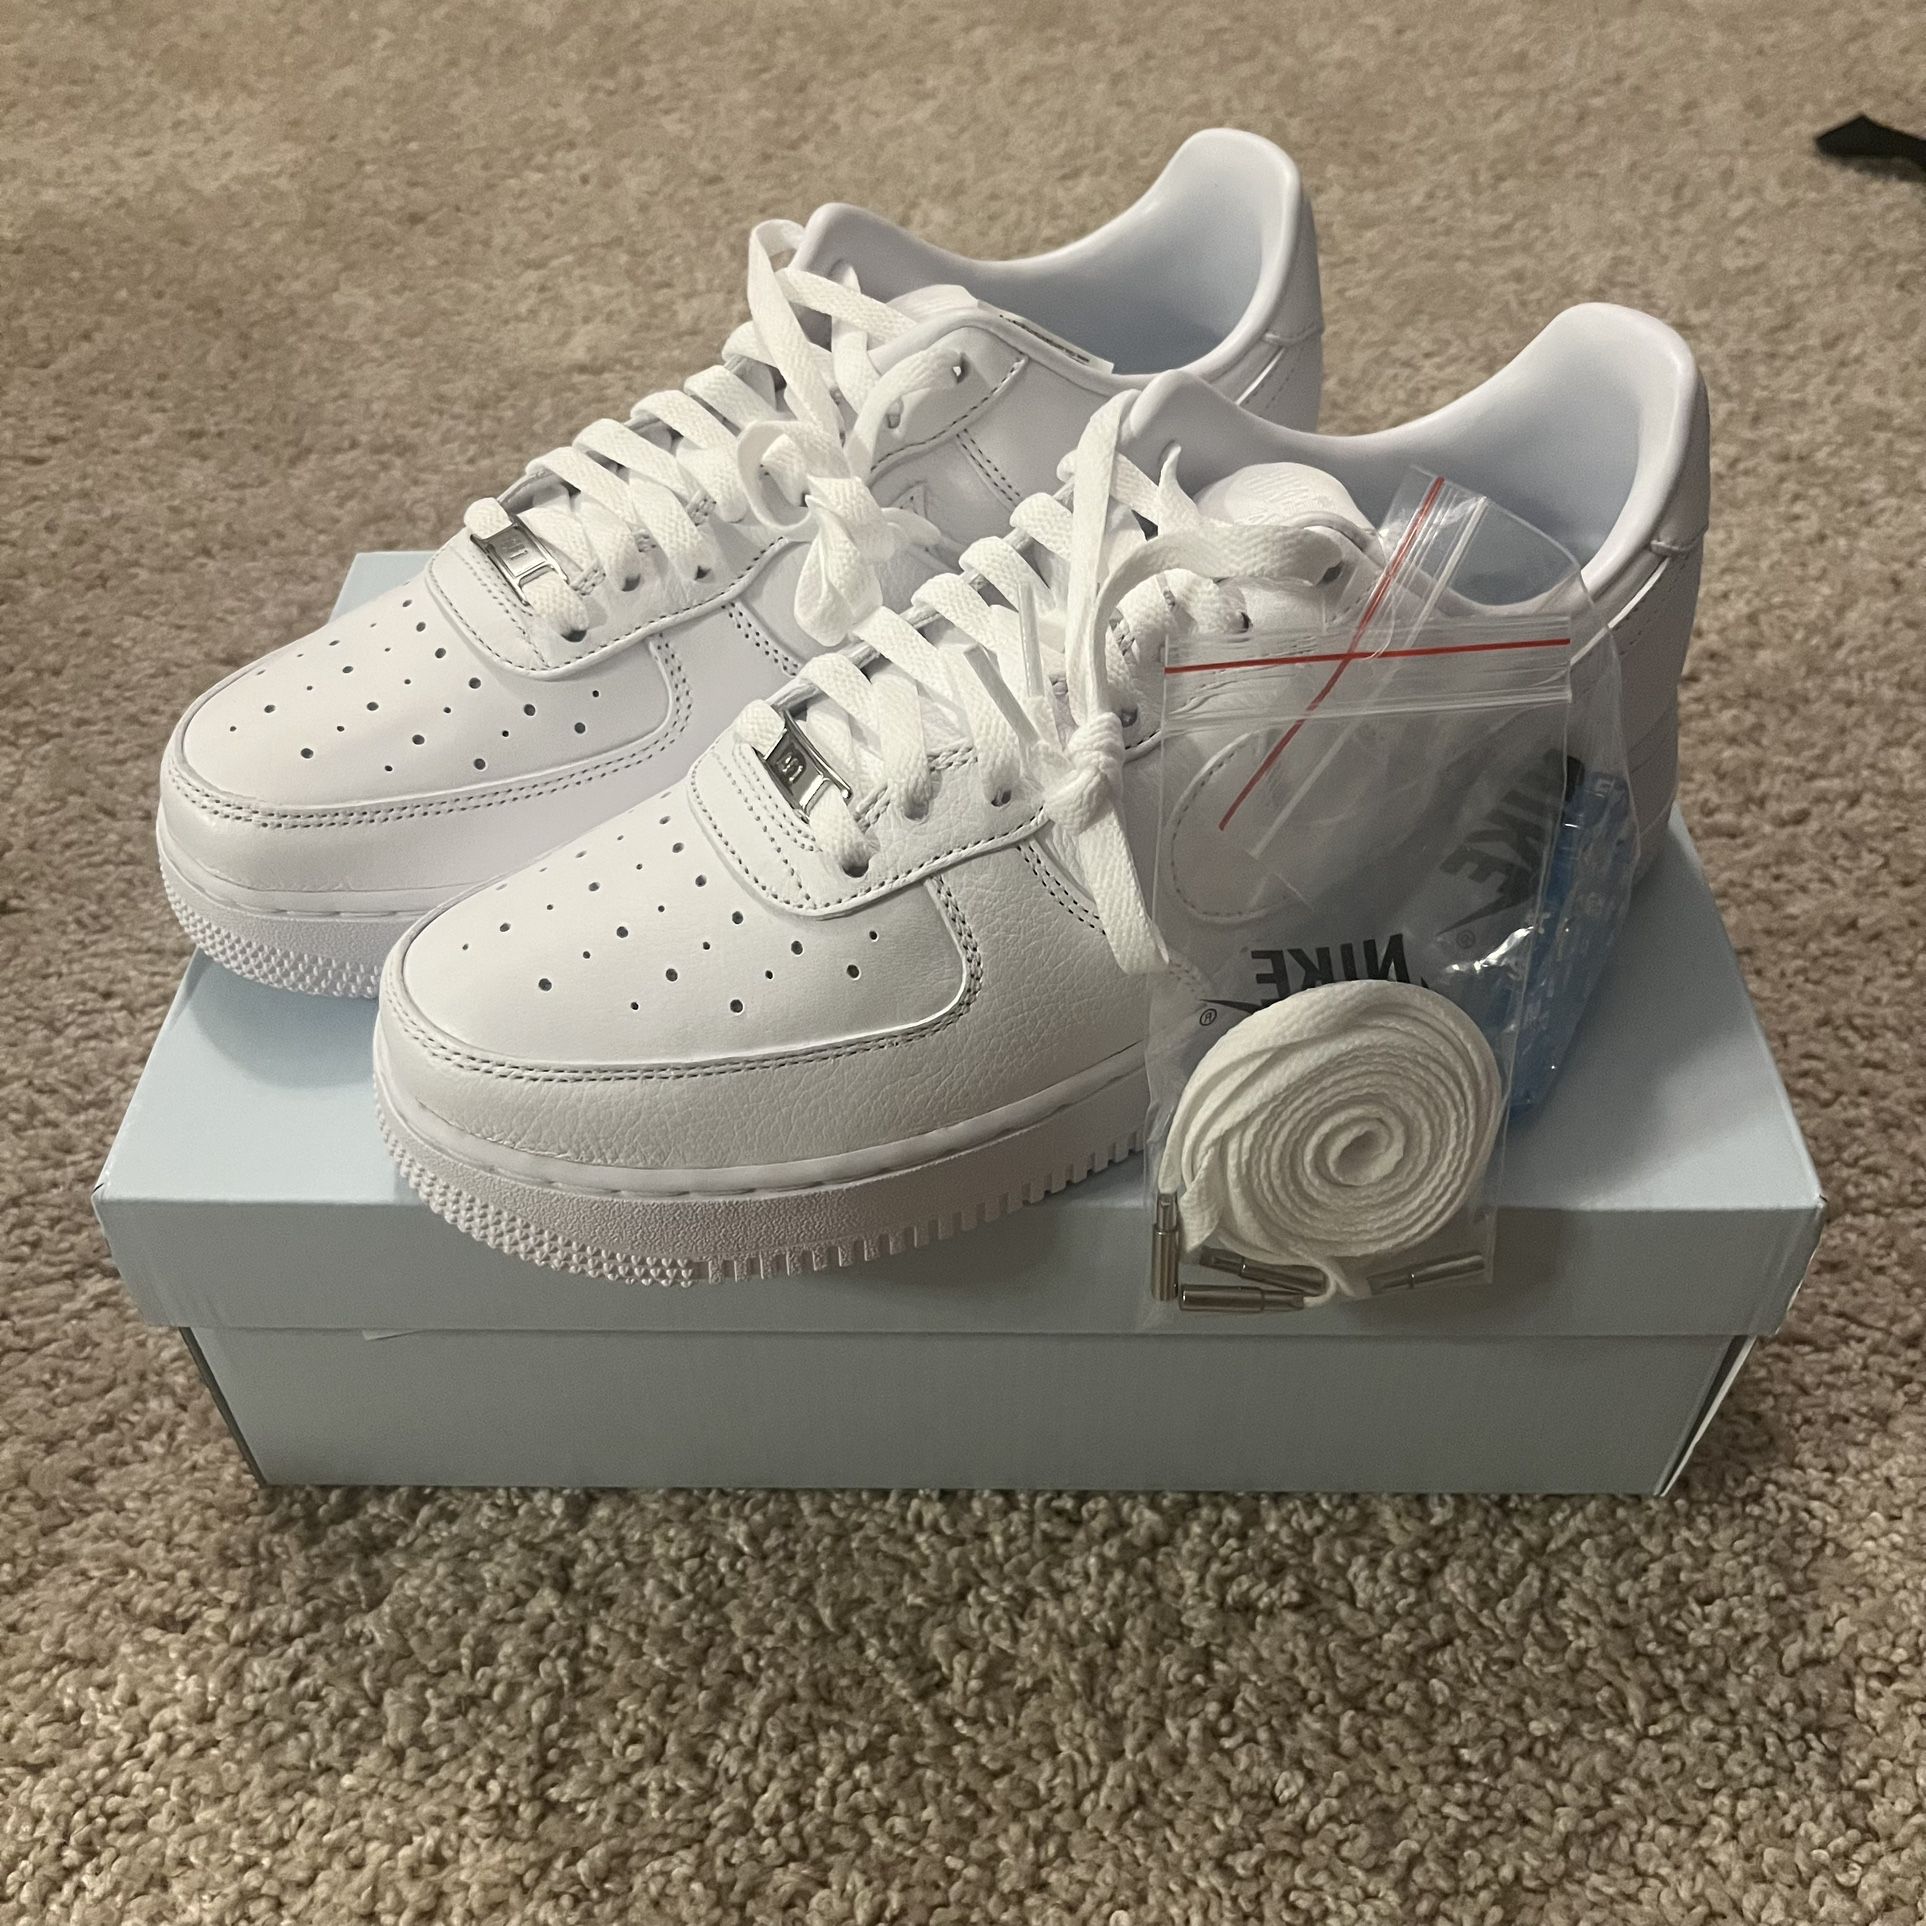 Nike x Nocta CLB Air Force 1 Size 9.5